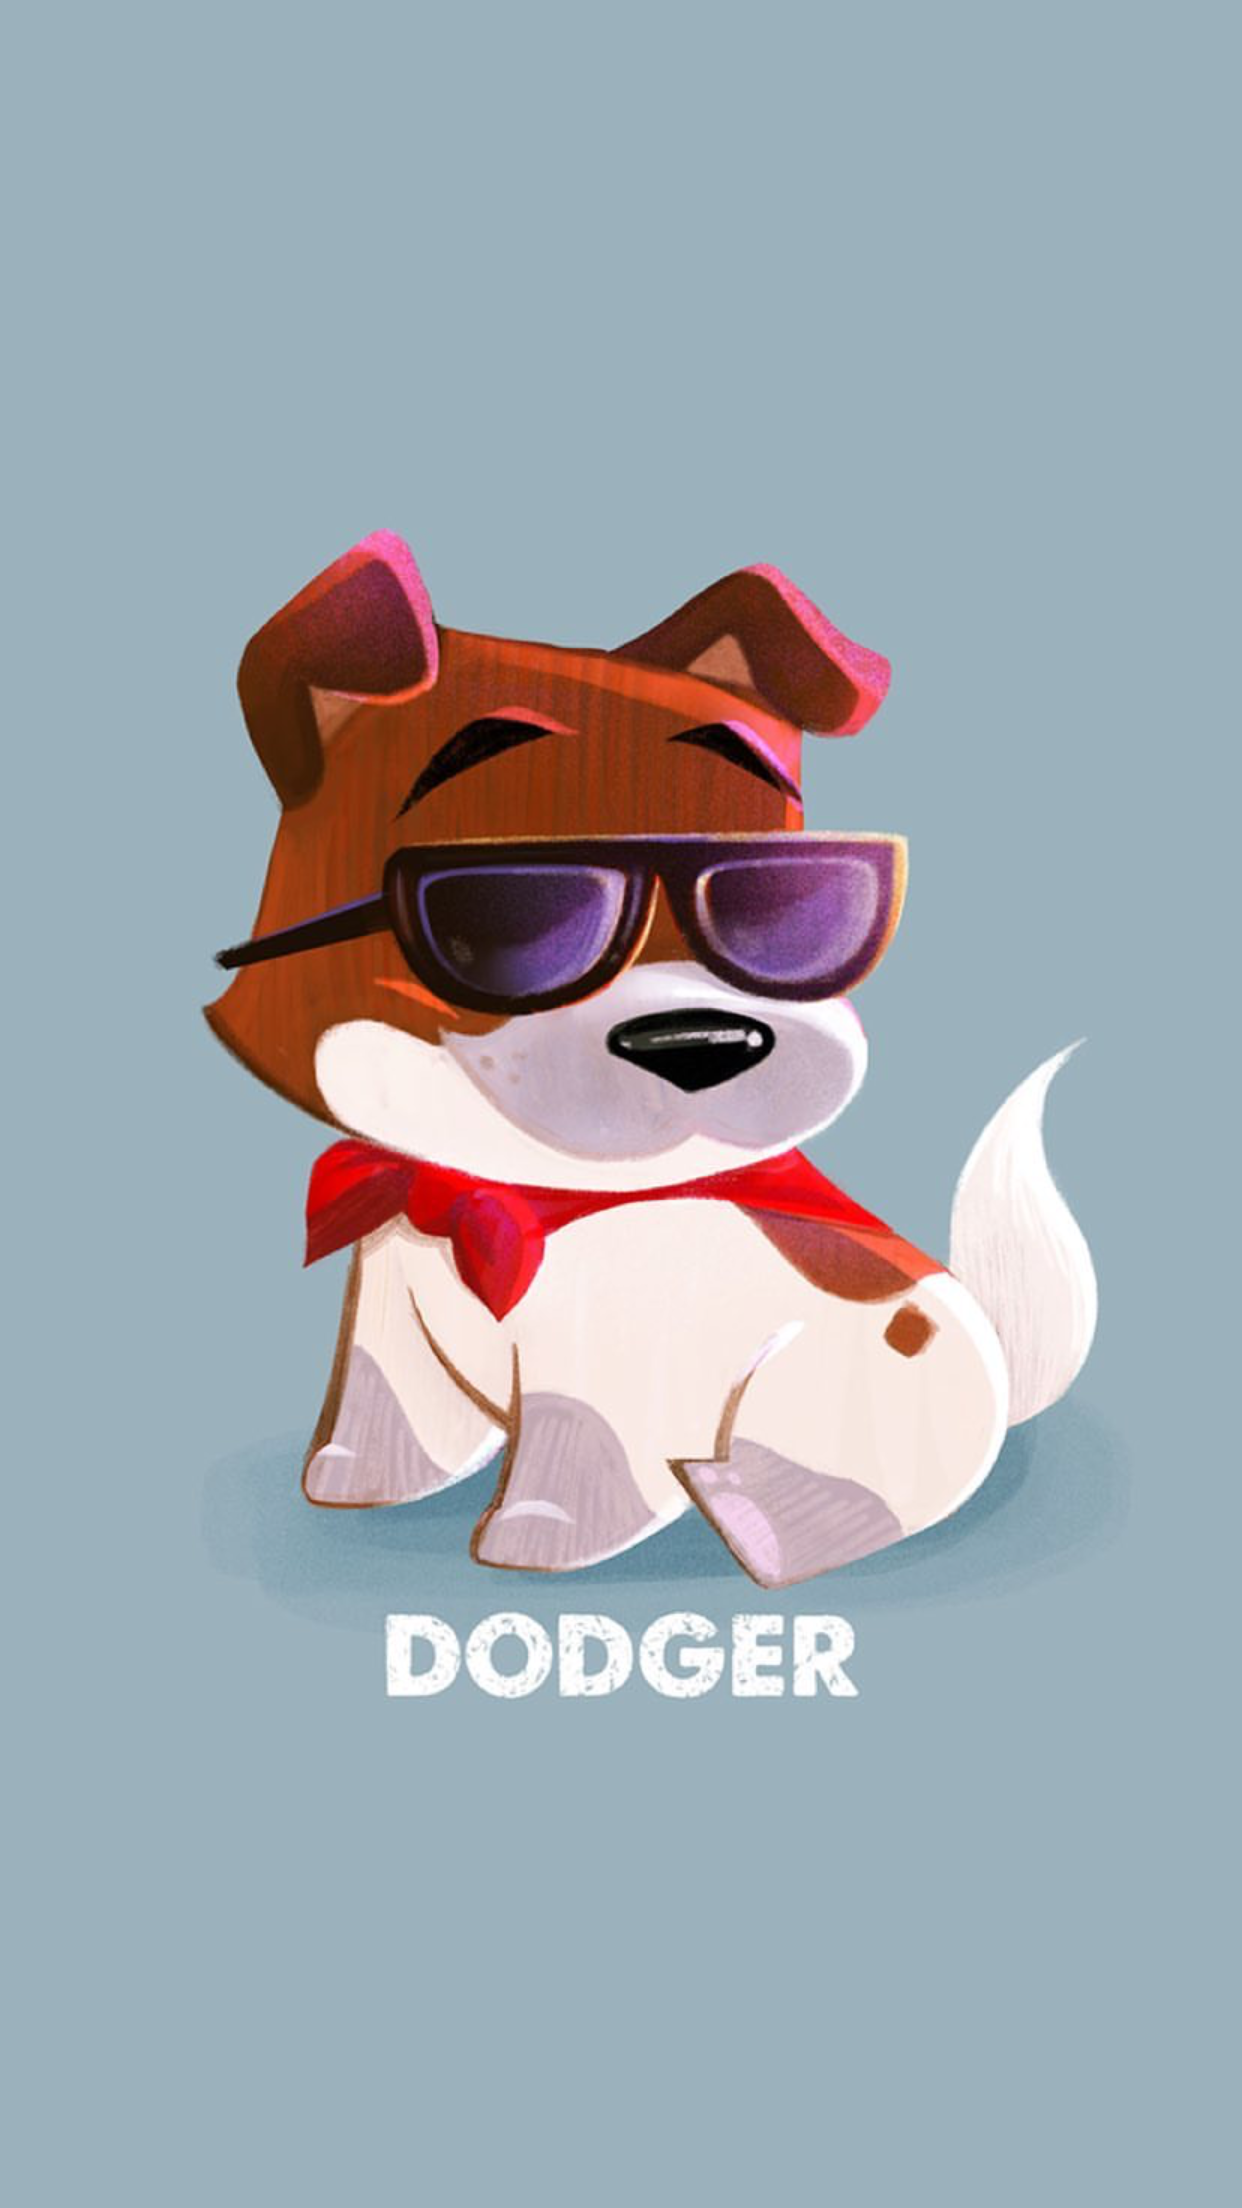 Dodger from Disney's Oliver and Company, dog, Puppy, lock screen background wallpaper for android cellphone iPhone. Disney sidekicks, Disney dogs, Disney